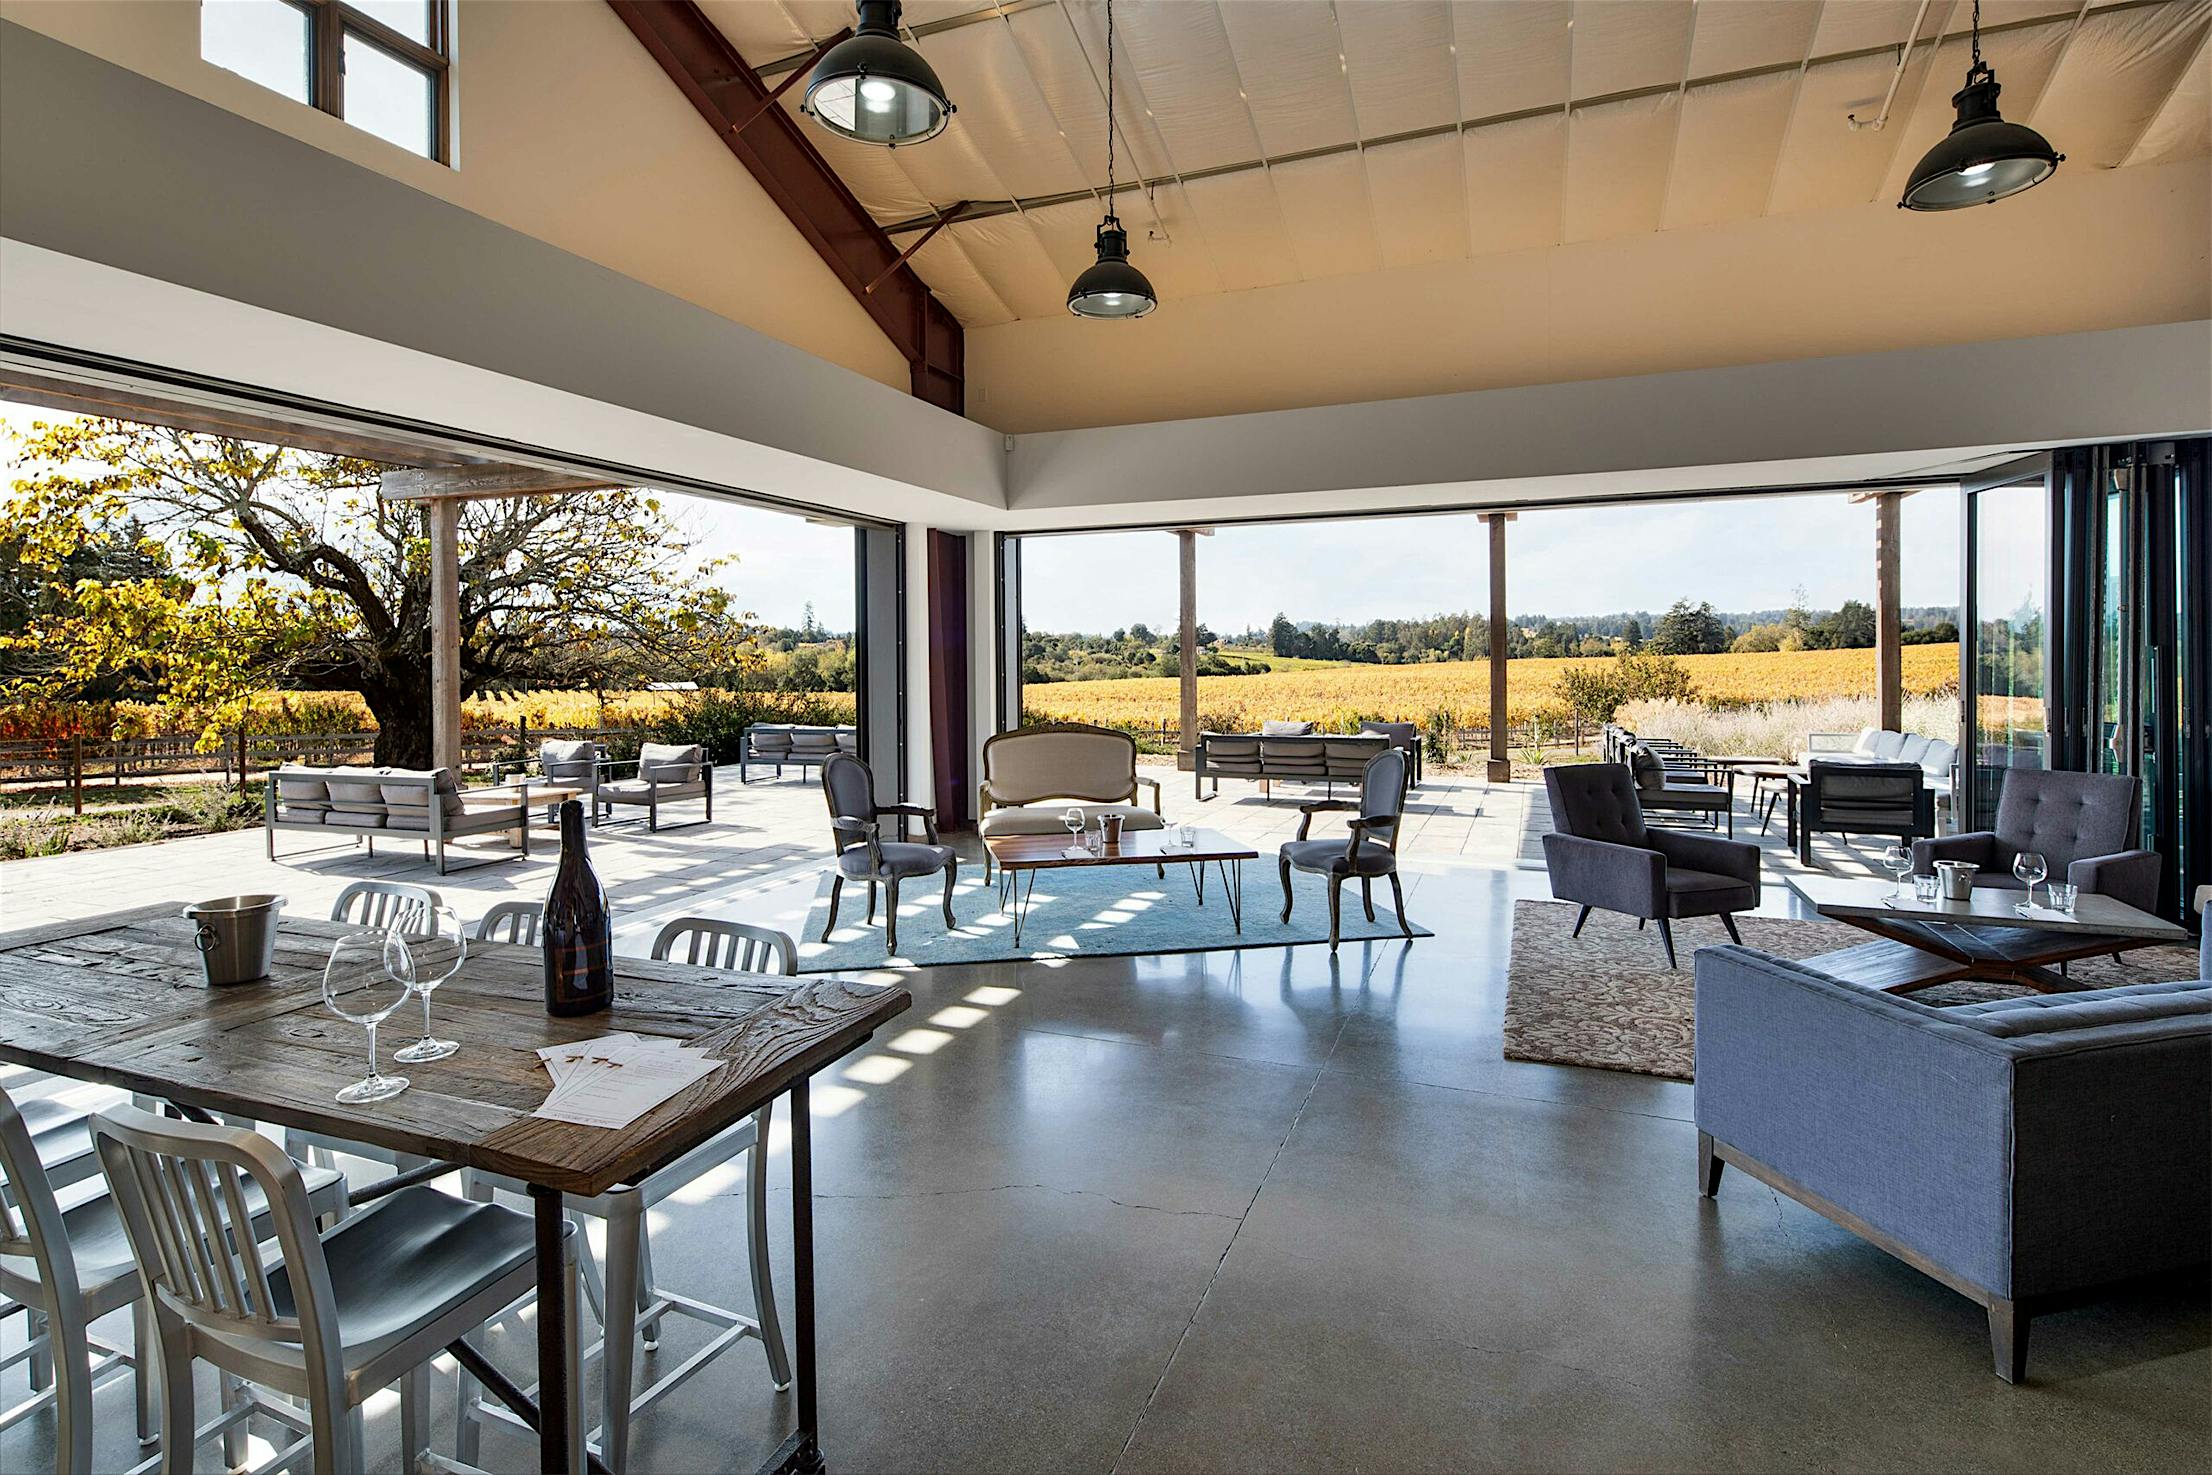 Northern California winery design with NanaWall systems